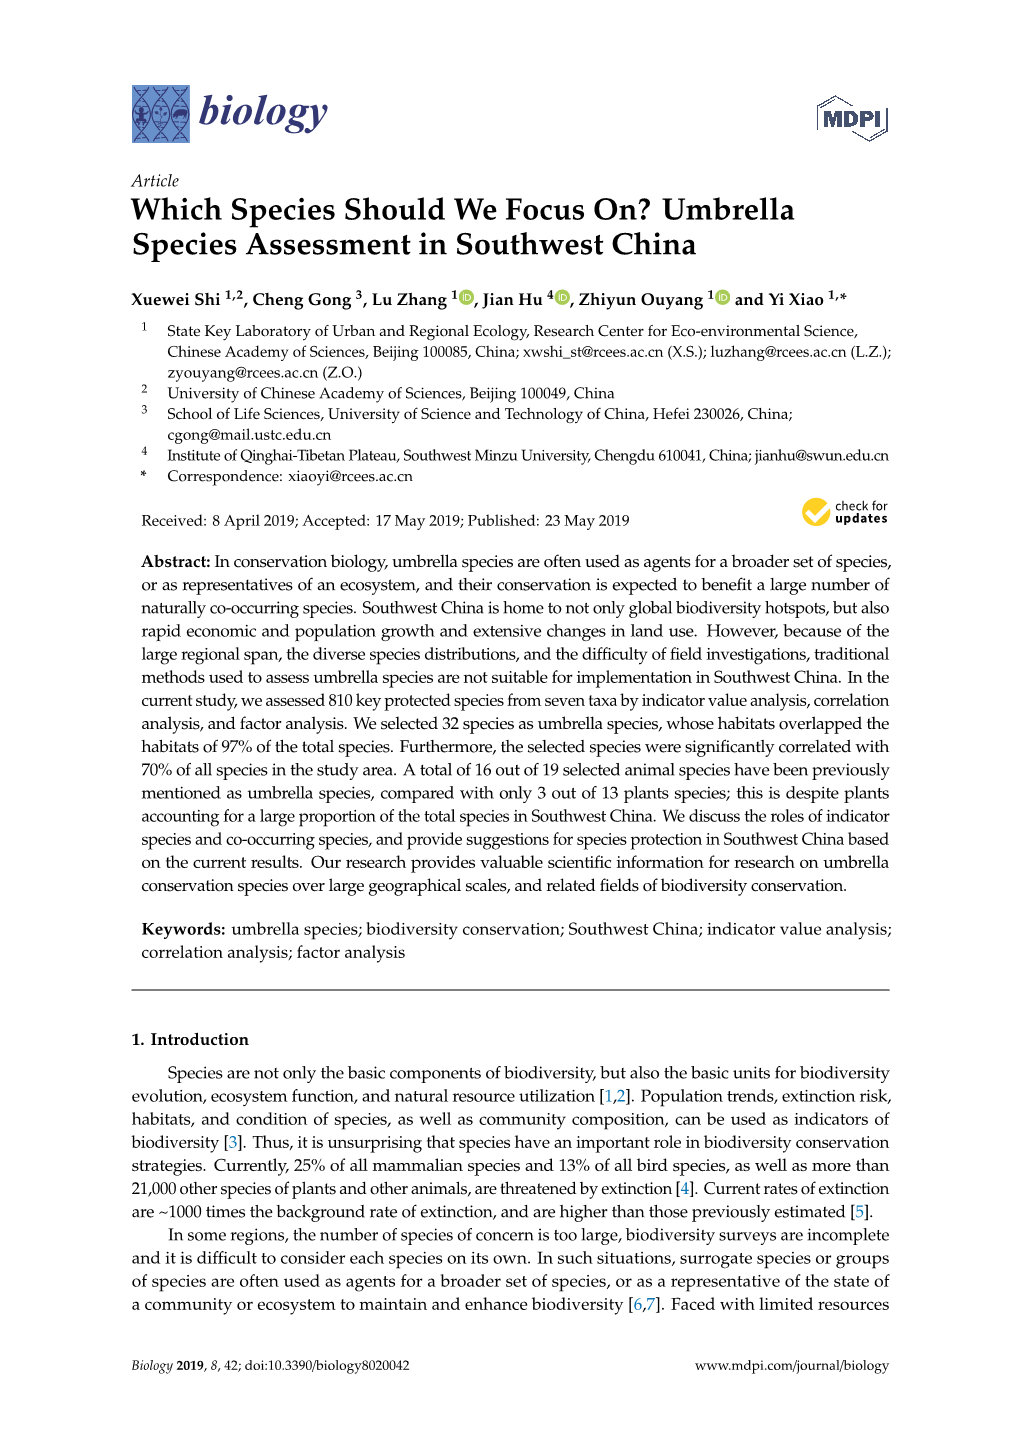 Which Species Should We Focus On? Umbrella Species Assessment in Southwest China